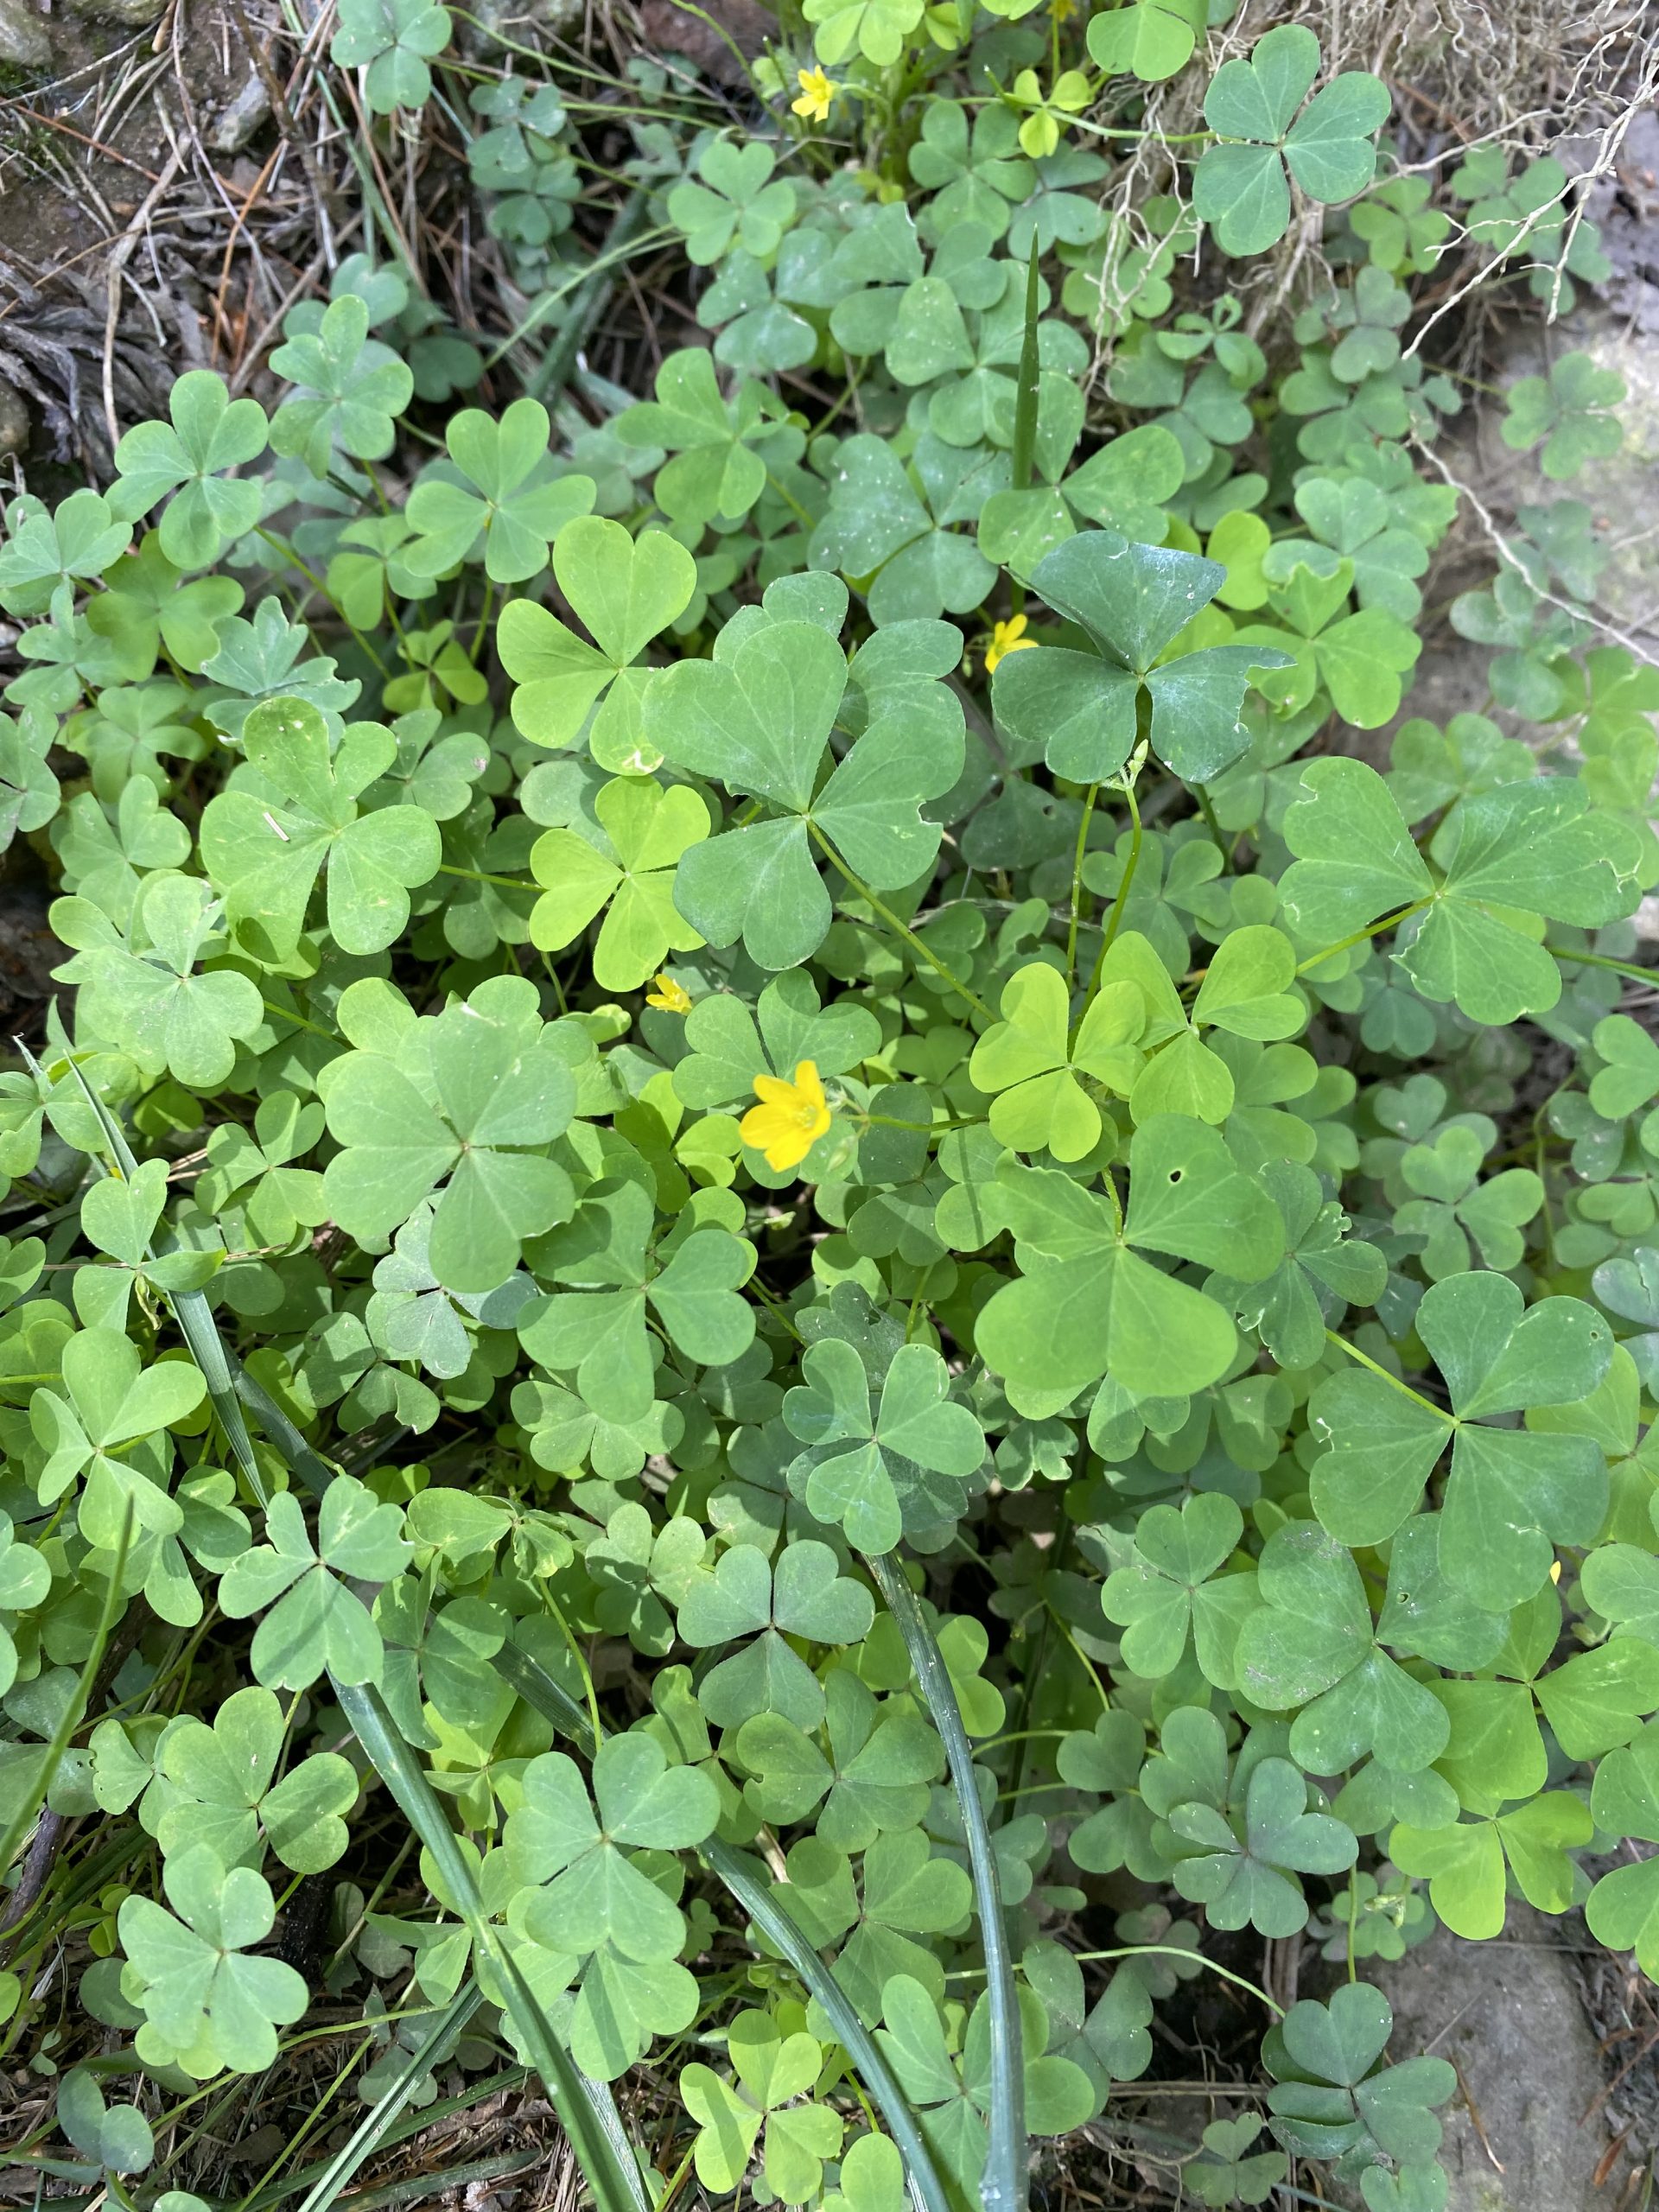 Oxalis clover like lawn weed scaled